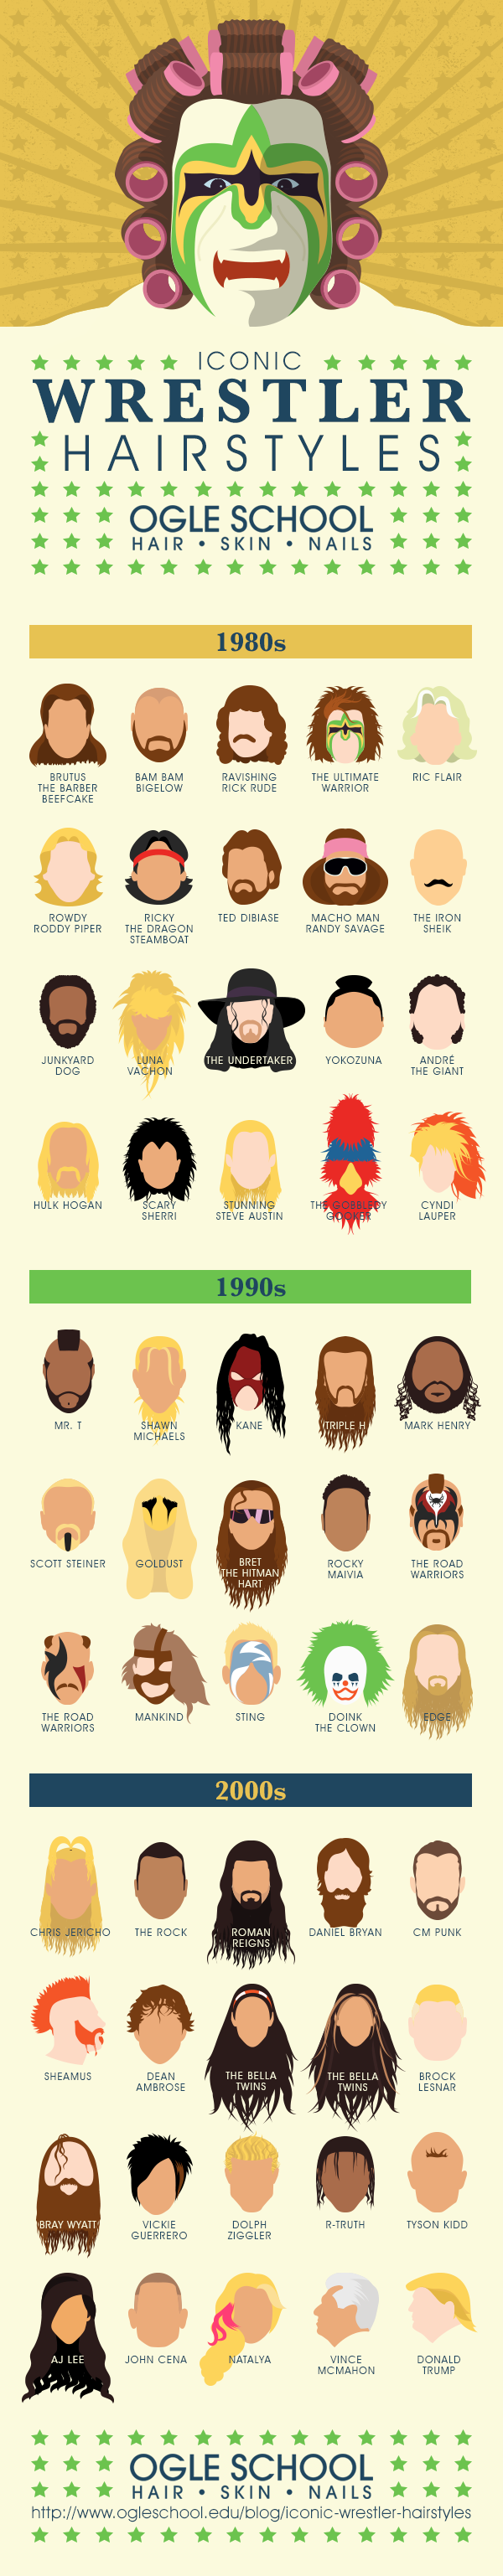 Crazy Haircuts of Professional Wrestling